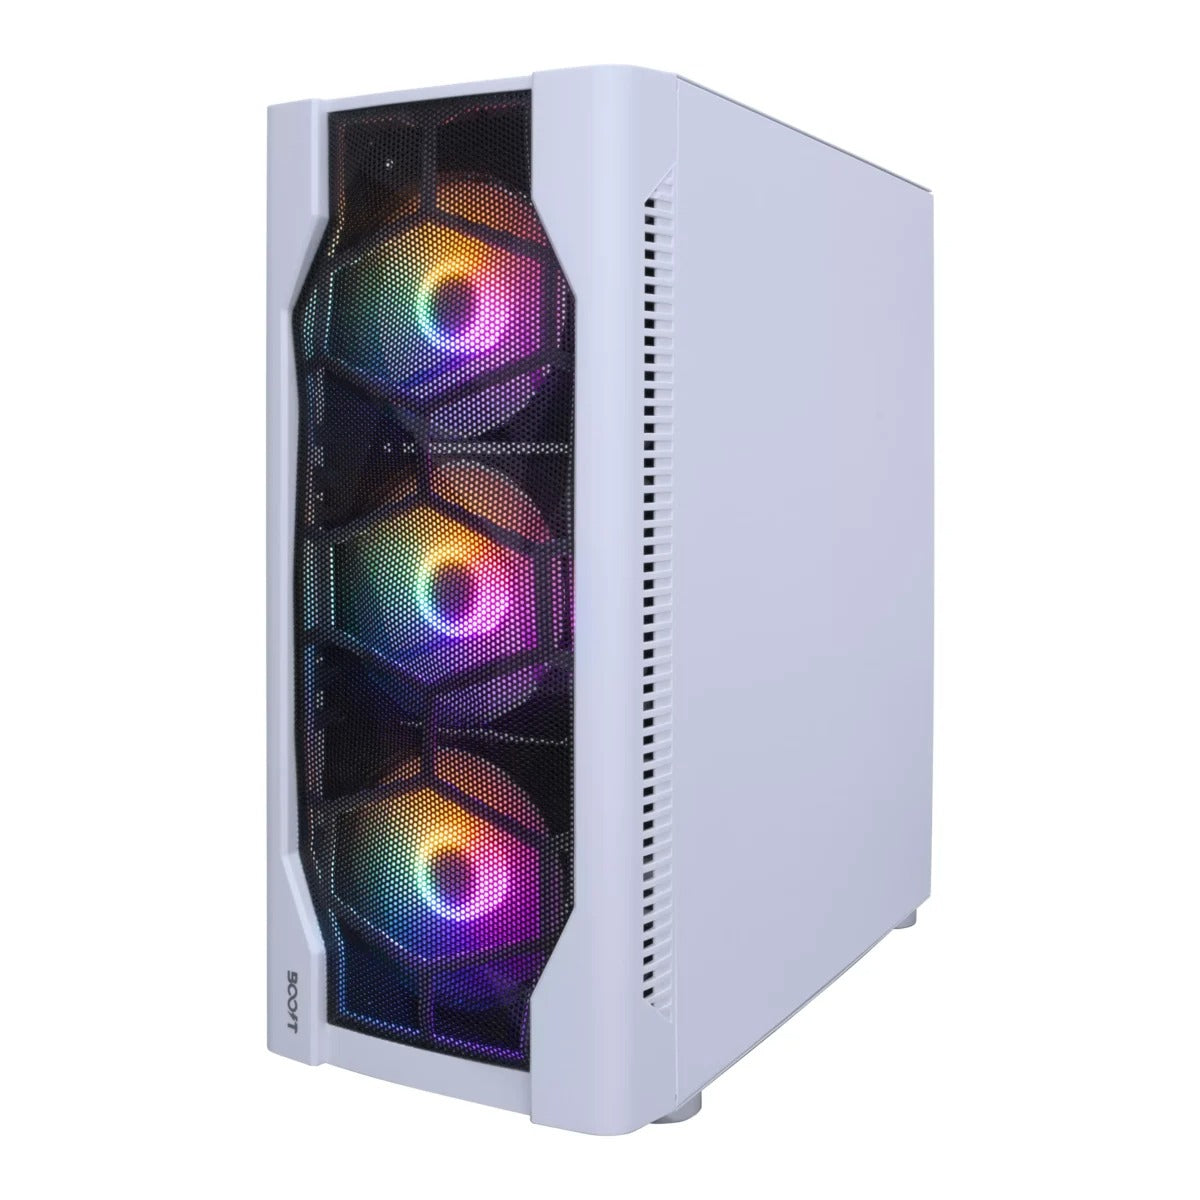 Boost Lion Best Quality PC Case Price in Pakistan